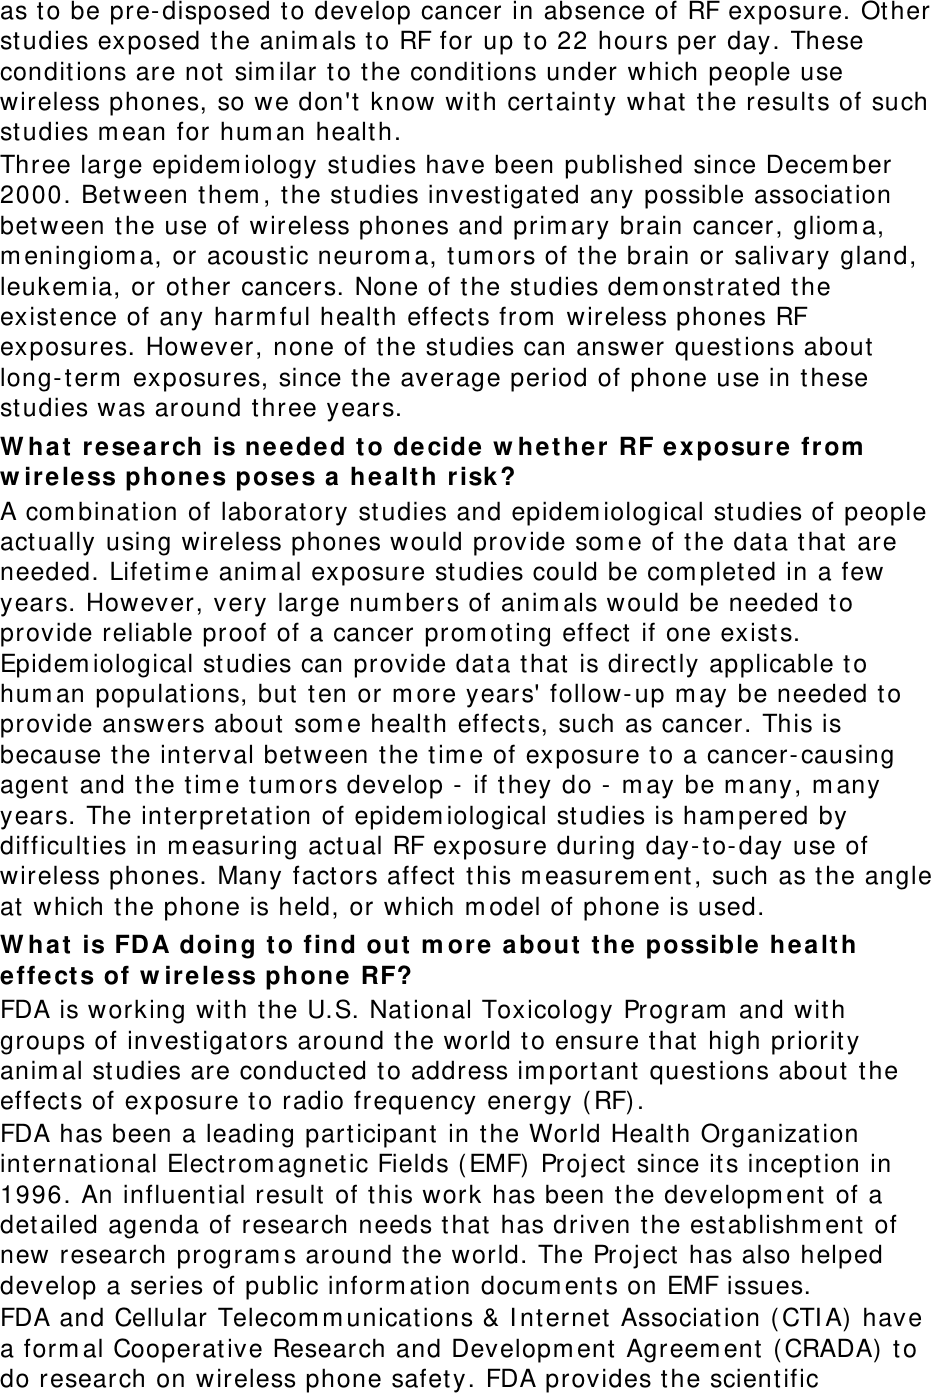 as to be pre- disposed to develop cancer in absence of RF exposure. Ot her studies exposed the anim als to RF for up to 22 hours per day. These conditions are not sim ilar to t he conditions under which people use wireless phones, so we don&apos;t know with certainty what  t he result s of such studies m ean for hum an healt h. Three large epidem iology st udies have been published since Decem ber 2000. Between t hem , the st udies investigat ed any possible associat ion bet ween t he use of wireless phones and prim ary brain cancer, gliom a, m eningiom a, or acoustic neurom a, t um ors of t he brain or salivary gland, leukem ia, or ot her cancers. None of the studies dem onst rated the existence of any harm ful health effect s from  wireless phones RF exposures. However, none of t he st udies can answer quest ions about  long- t erm  exposures, since the average period of phone use in t hese studies was around three years. W hat research is nee ded to de cide  w het he r RF exposure fr om  w irele ss phones pose s a  hea lt h  risk ? A com binat ion of laboratory st udies and epidem iological studies of people act ually using wireless phones would provide som e of t he data t hat  are needed. Lifet im e anim al exposure studies could be com plet ed in a few years. However, very large num bers of anim als would be needed t o provide reliable proof of a cancer prom oting effect  if one exists. Epidem iological studies can provide dat a that is directly applicable t o hum an populat ions, but  ten or m ore years&apos; follow- up m ay be needed to provide answers about som e health effect s, such as cancer. This is because the interval between t he tim e of exposure t o a cancer- causing agent and t he tim e tum ors develop -  if they do -  m ay be m any, m any years. The interpret ation of epidem iological studies is ham pered by difficulties in m easuring actual RF exposure during day-to-day use of wireless phones. Many fact ors affect  this m easurem ent , such as the angle at  which t he phone is held, or which m odel of phone is used. W hat is FDA doing to find out  m or e about  t he  possible  hea lt h effe ct s of w ire less phone RF? FDA is working with t he U.S. National Toxicology Program  and with groups of invest igators around the world to ensure that high priority anim al st udies are conduct ed t o address im port ant questions about  t he effect s of exposure to radio frequency energy ( RF) . FDA has been a leading participant  in the World Health Organizat ion international Elect rom agnet ic Fields (EMF) Project  since its inception in 1996. An influential result of t his work has been t he developm ent of a det ailed agenda of research needs t hat has driven t he est ablishm ent of new research program s around the world. The Project  has also helped develop a series of public inform ation docum ents on EMF issues. FDA and Cellular Telecom m unications &amp; I nt ernet Association ( CTI A) have a form al Cooperat ive Research and Developm ent  Agreem ent  ( CRADA)  t o do research on wireless phone safet y. FDA provides the scient ific 